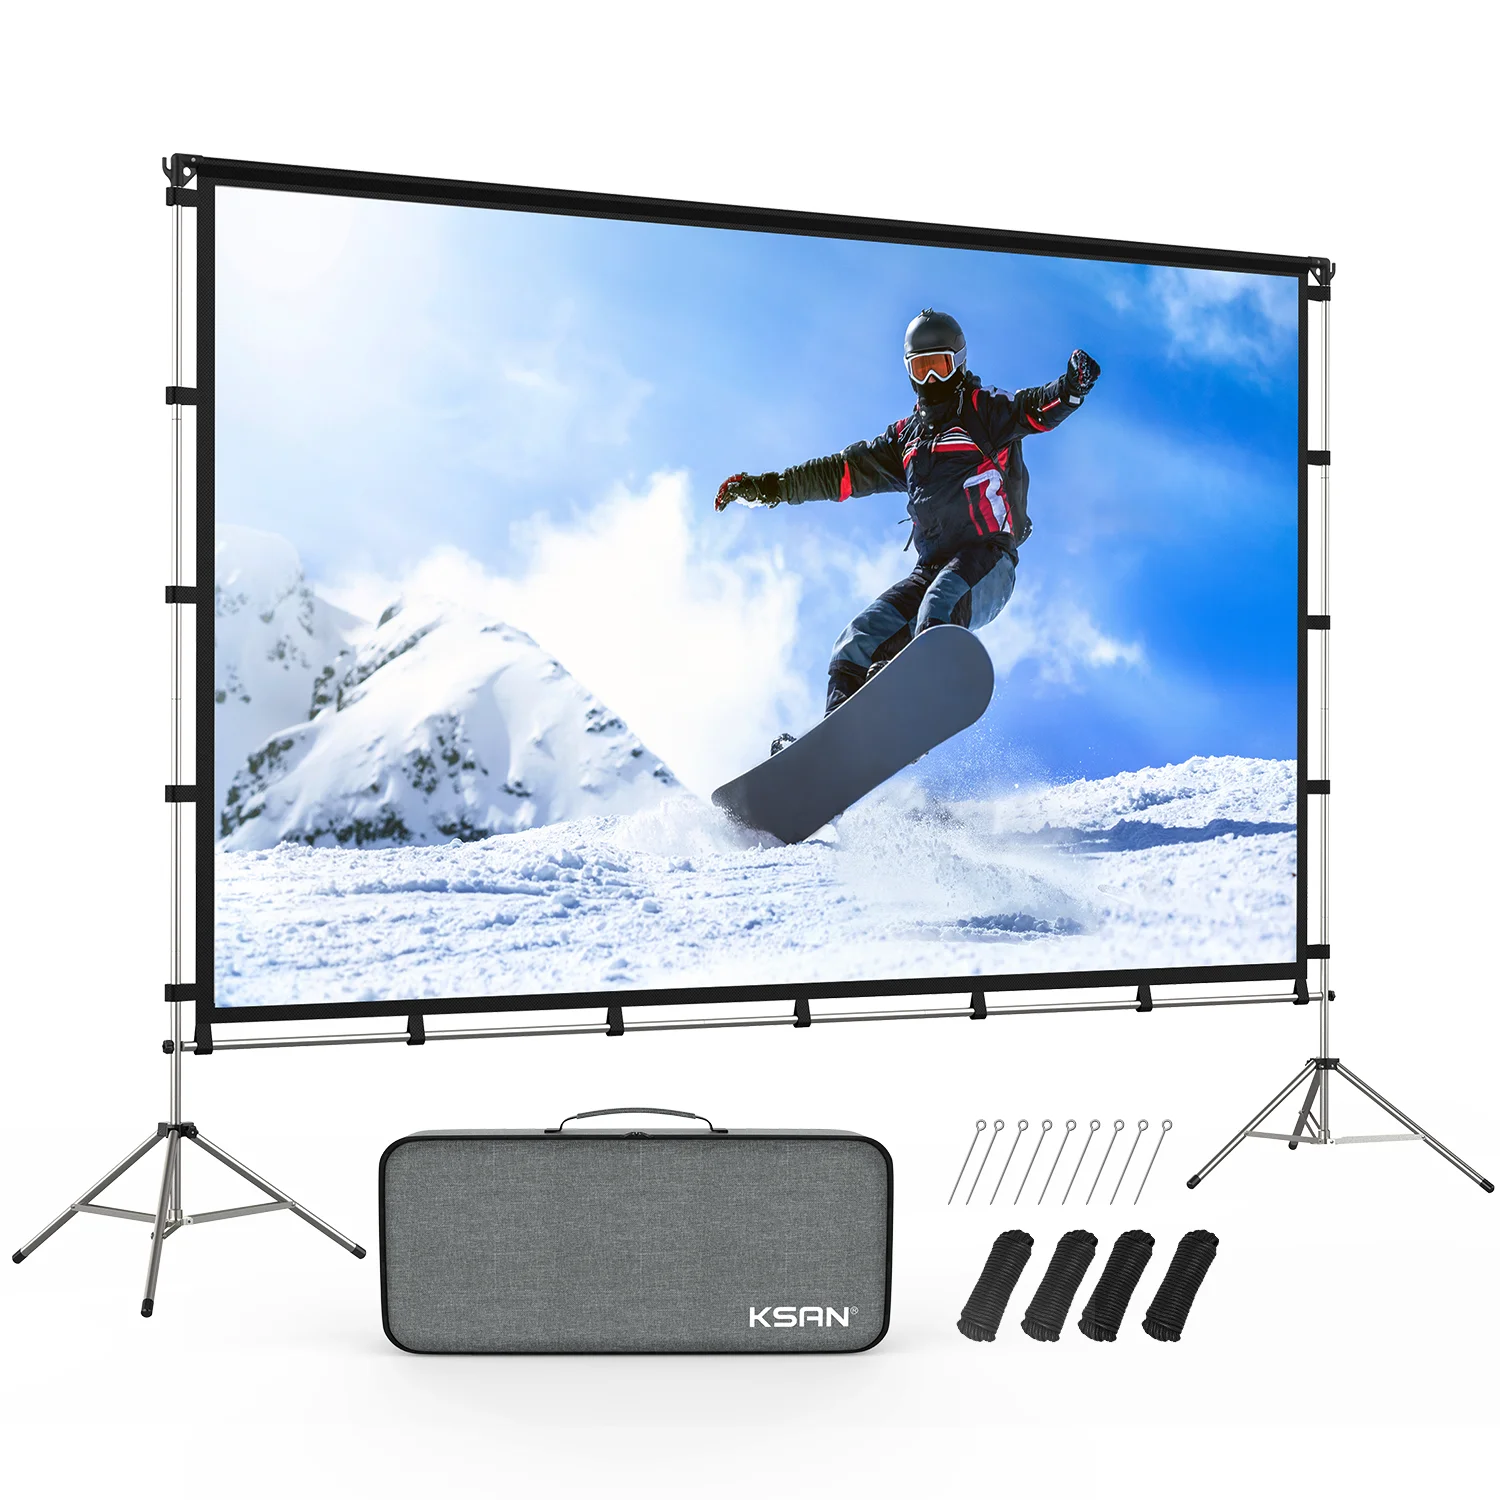 

Portable 120 Inches 16:9 Simple soft fabric Projector Screen Portable Foldable with Tripod stand, White